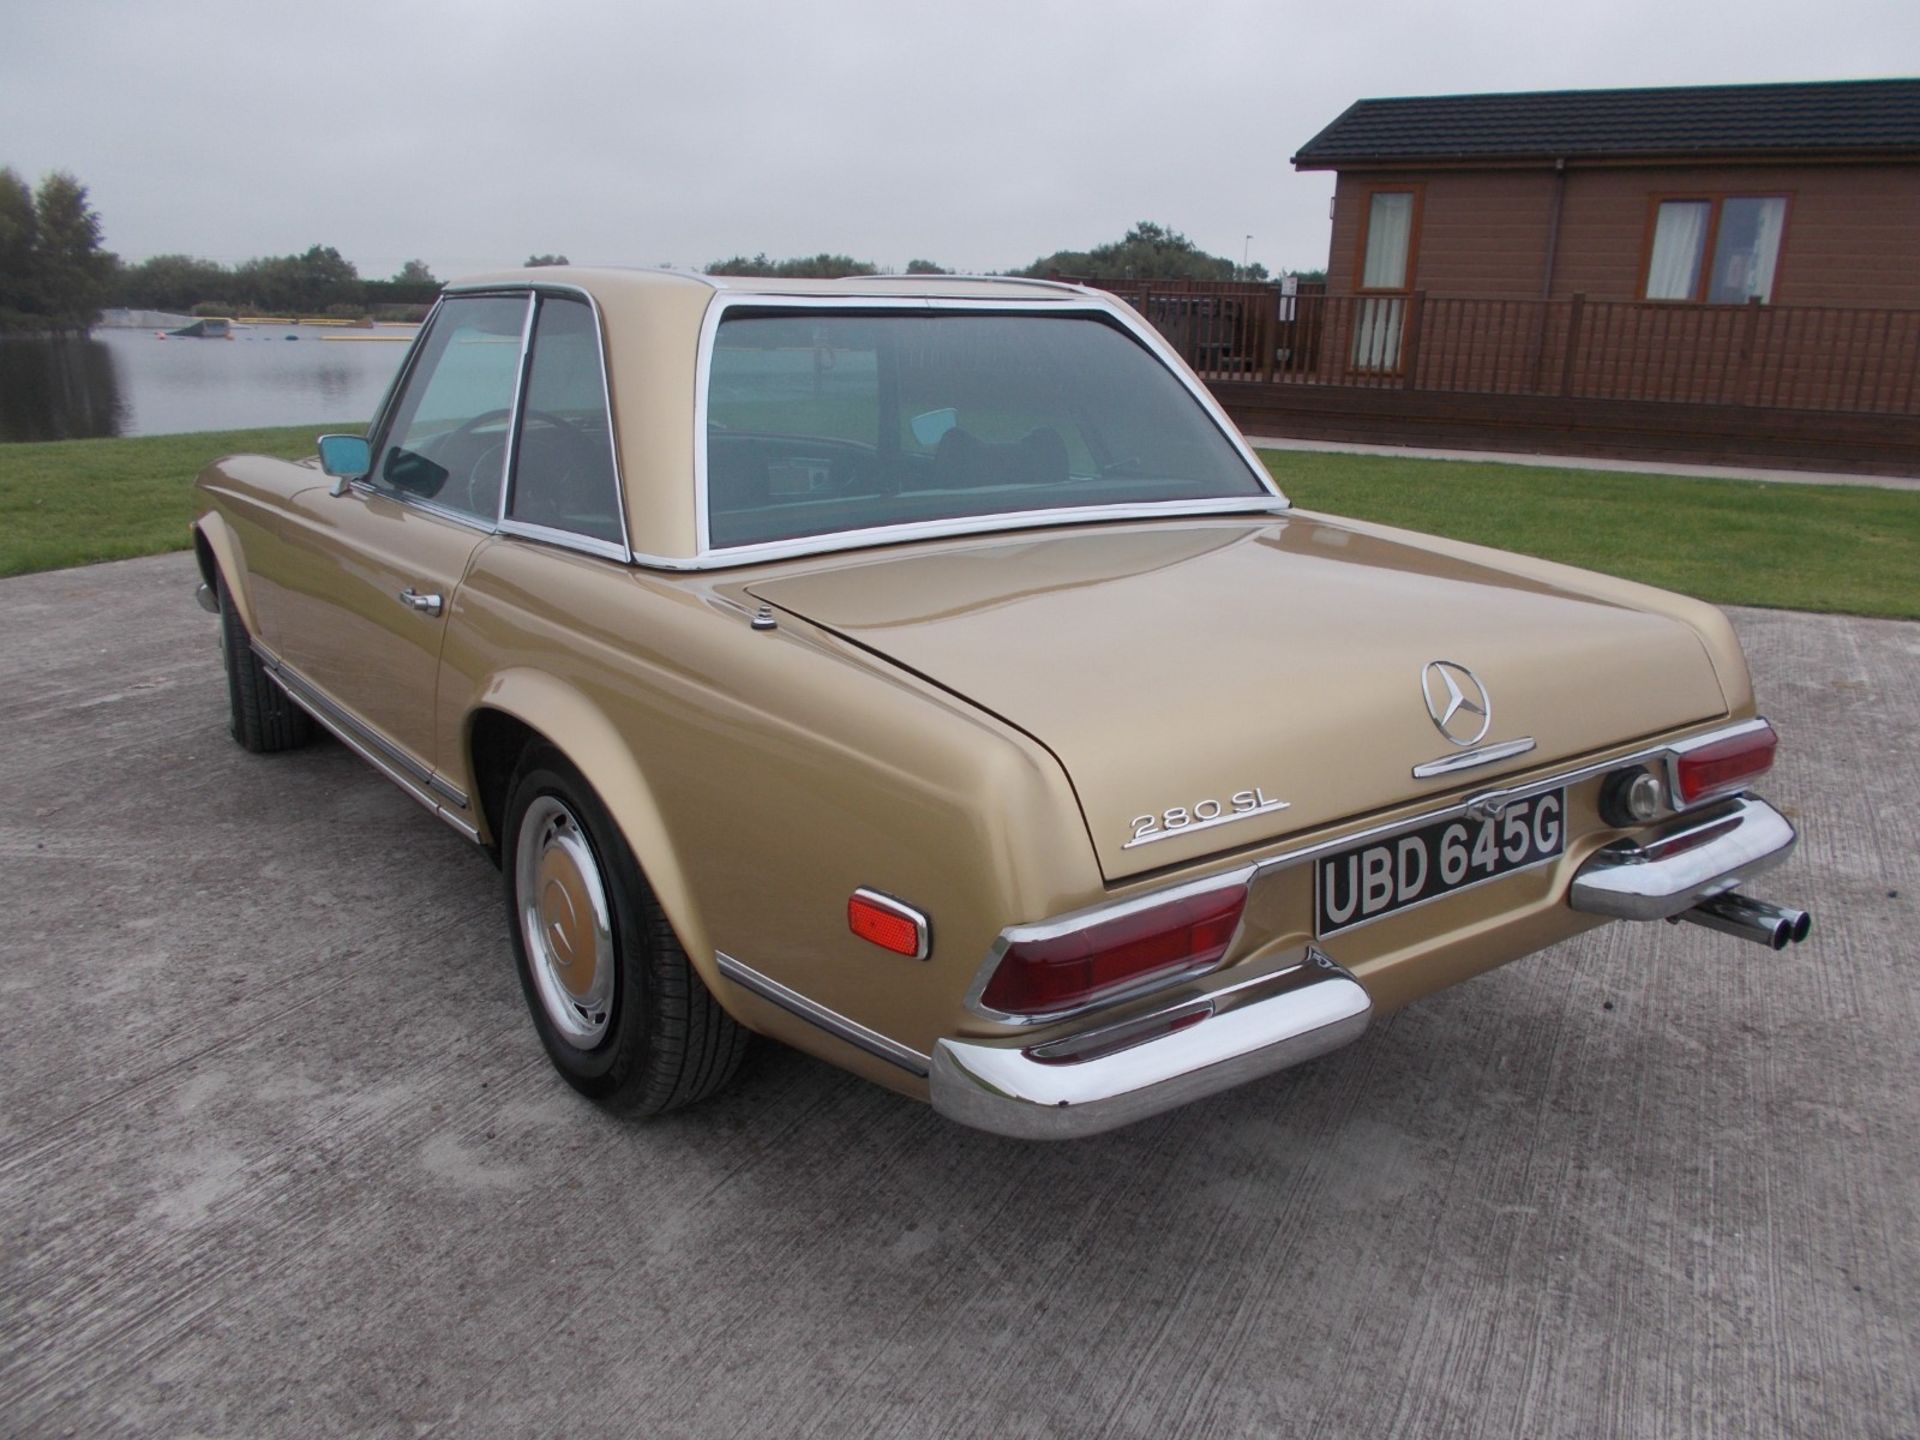 1969 MERCEDES 280SL PAGODA, AUTOMATIC, HARD/SOFT TOPS, LEFT HAND DRIVE, AMERICAN IMPORT *PLUS VAT* - Image 38 of 38